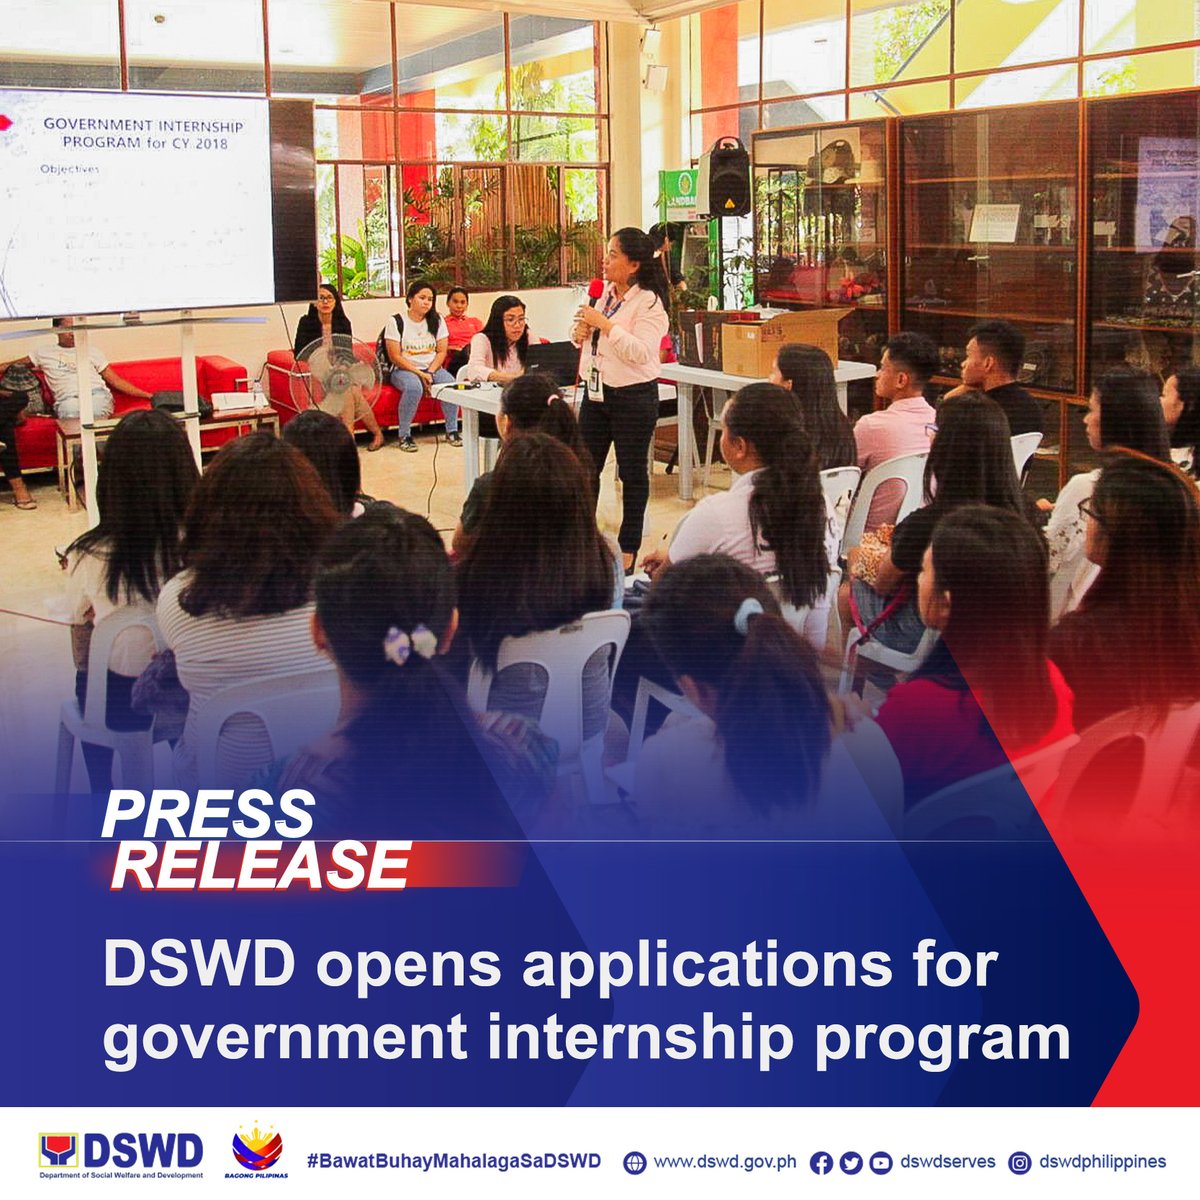 𝗗𝗦𝗪𝗗 𝗣𝗥𝗘𝗦𝗦 𝗥𝗘𝗟𝗘𝗔𝗦𝗘: DSWD opens applications for government internship program The Department of Social Welfare and Development (DSWD) is now accepting applicants for the Government Internship Program (GIP) starting May 8 to 10, DSWD Asst. Secretary for Disaster…